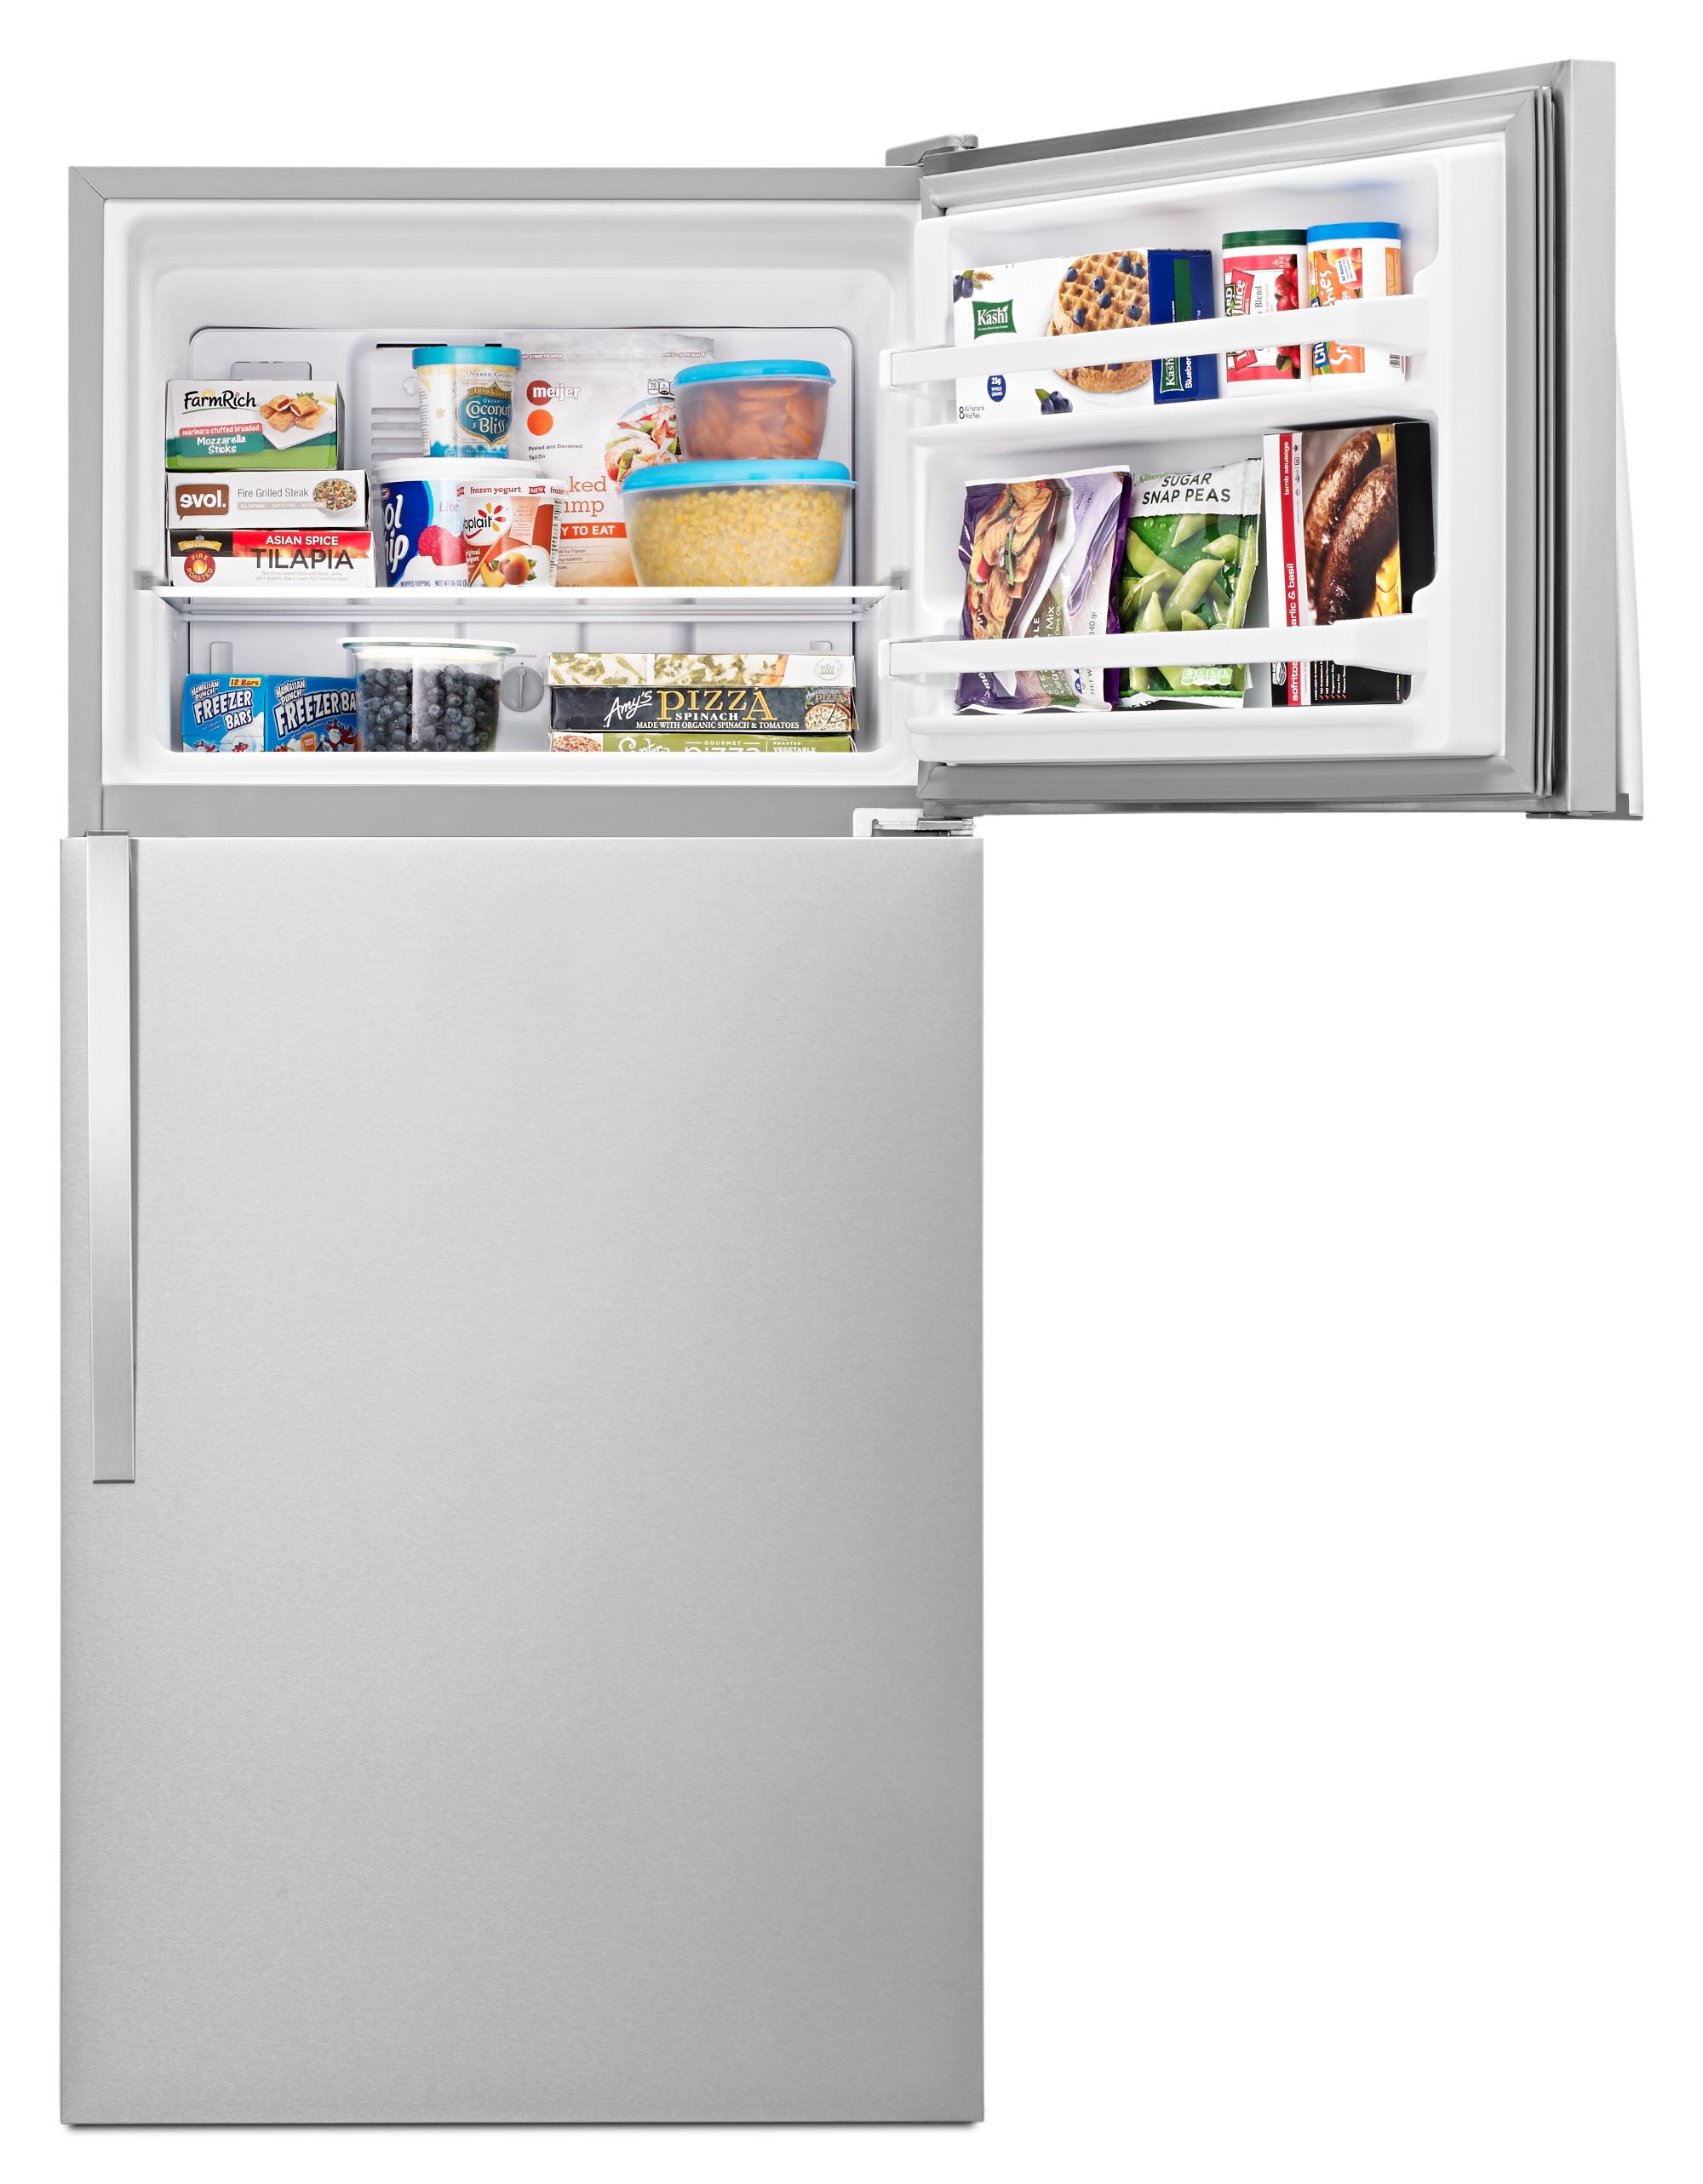  Smad 18.0 Cu.Ft. 2 Doors Refrigerator with Freezer, Top Freezer  Refrigerator with Adjustable Thermostat Control and Reversible Door for  Garage/Office/Kitchen/Home, Stainless Steel : Appliances